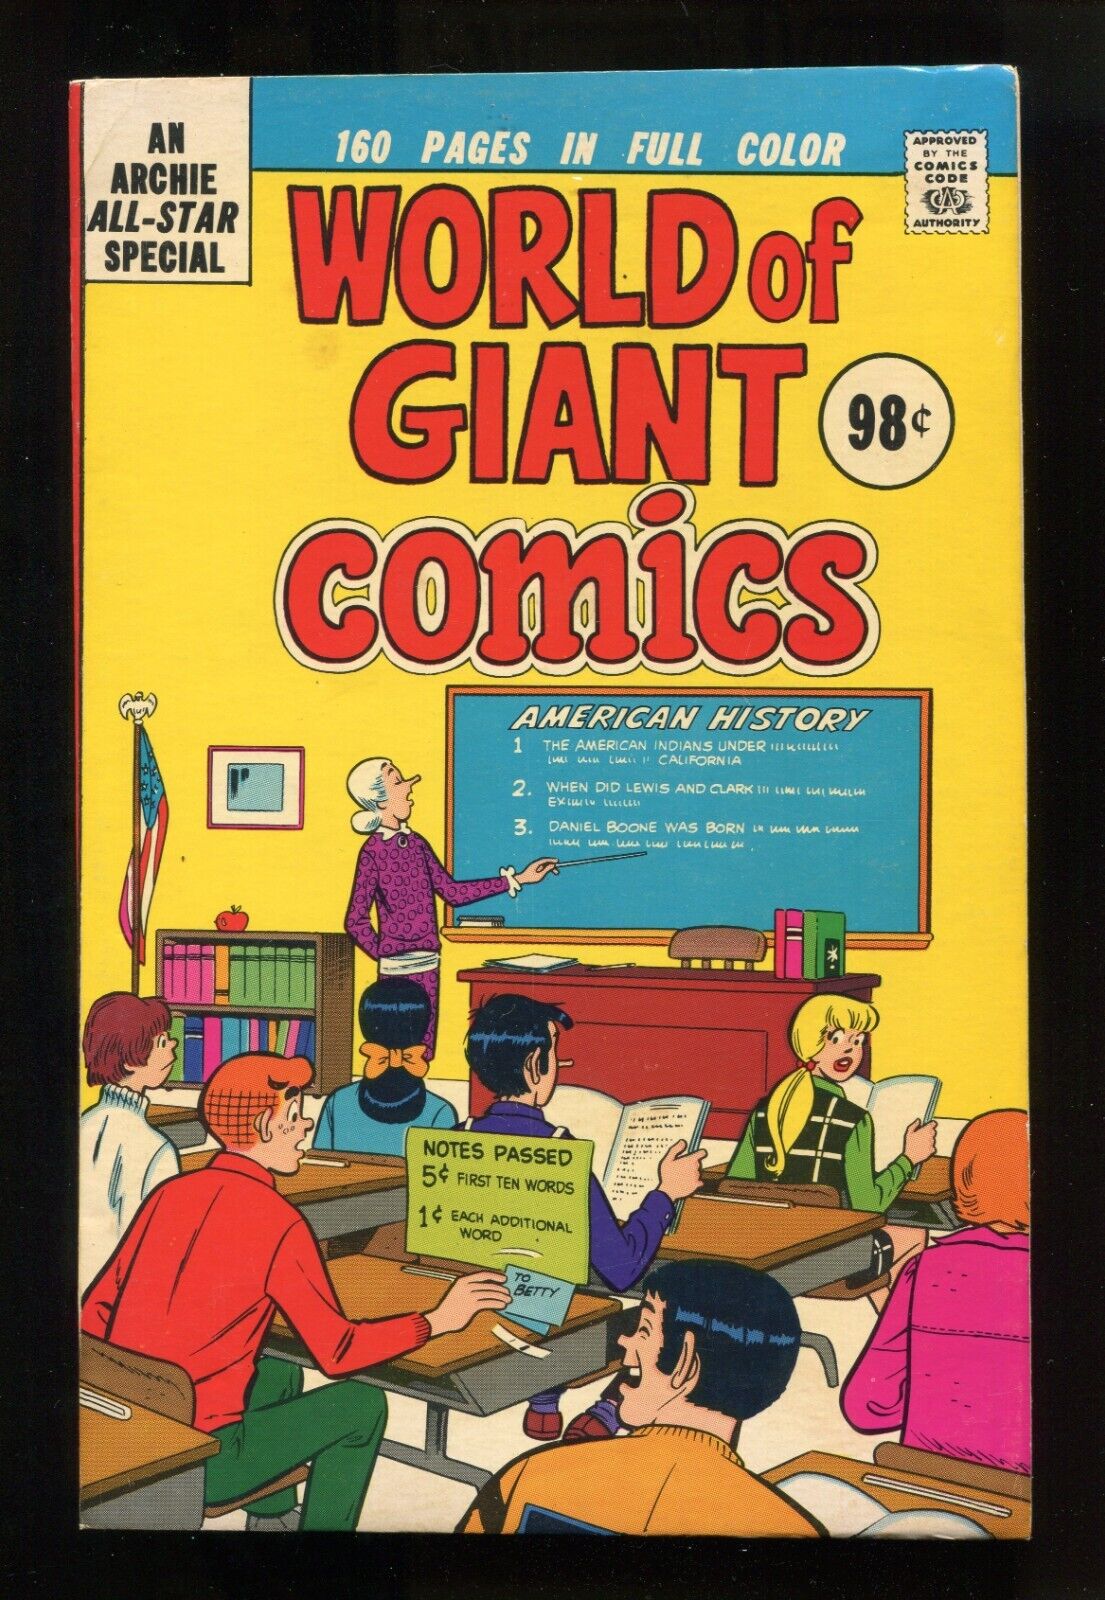 ARCHIE ALL-STAR SPECIAL - WORLD OF GIANT COMICS - 1ST PRINTING - SHARP - 1976